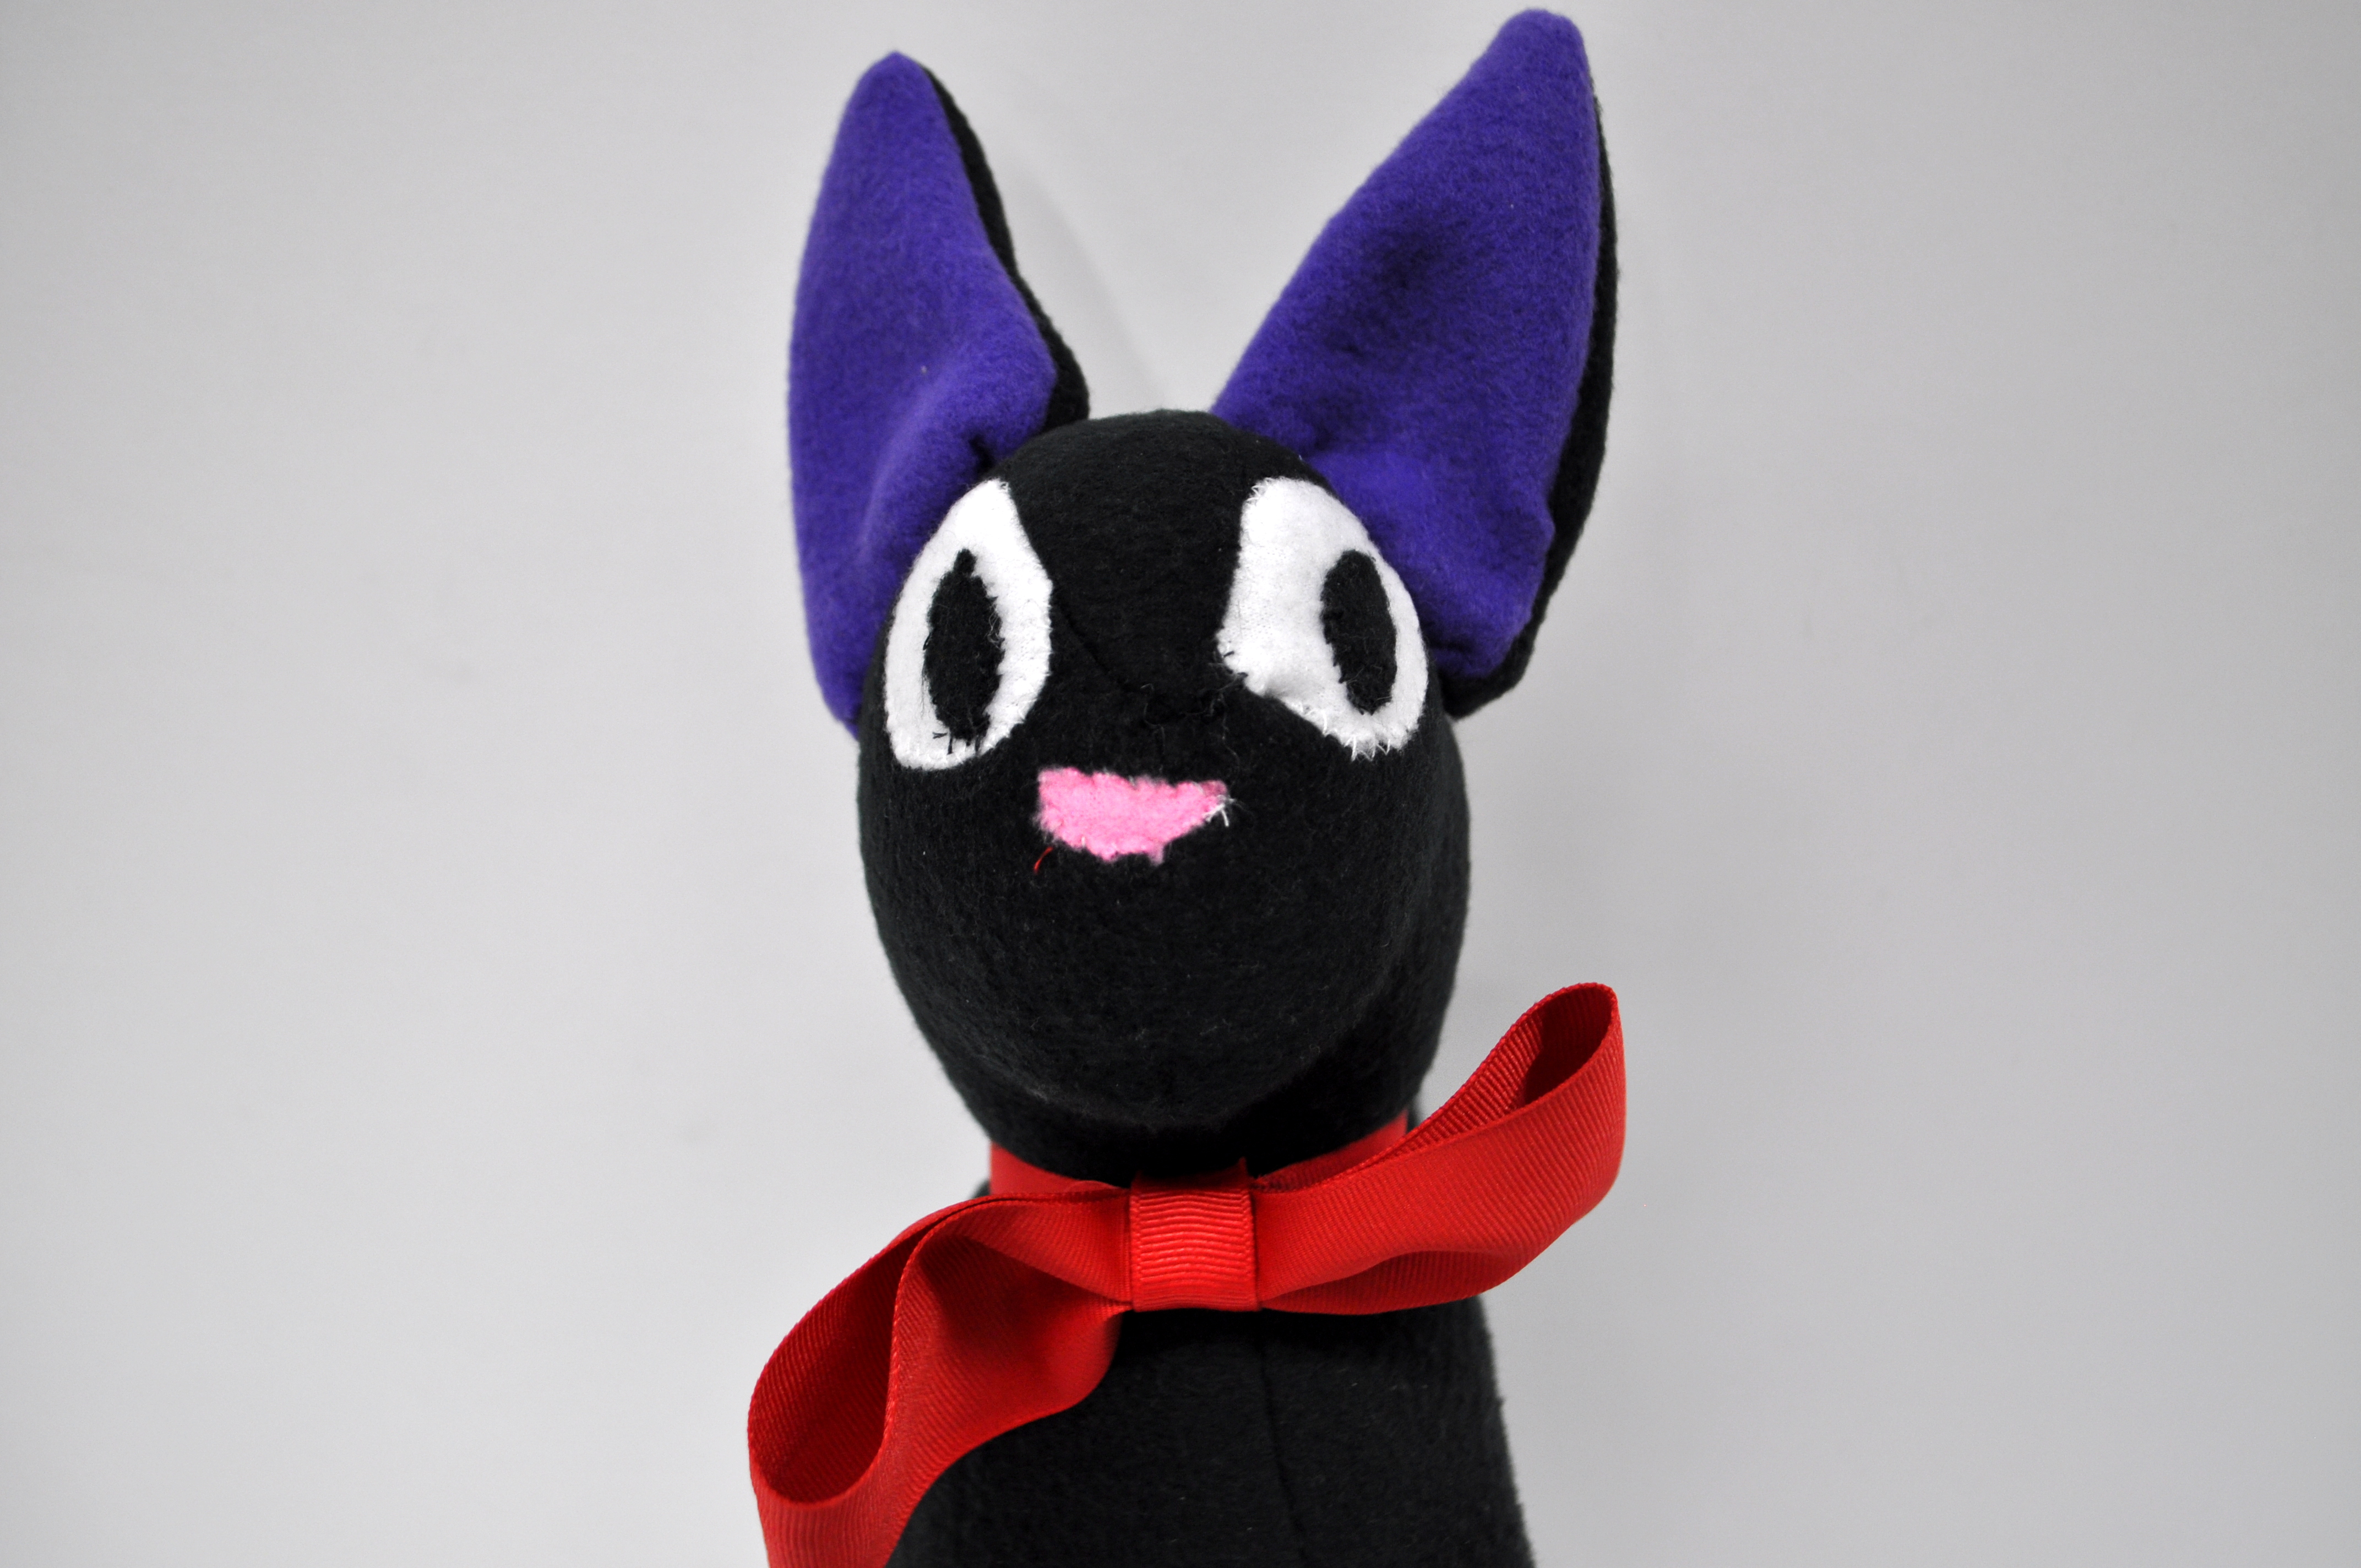 JiJi the Cat from Kiki's Delivery Service – Apealeing Productions